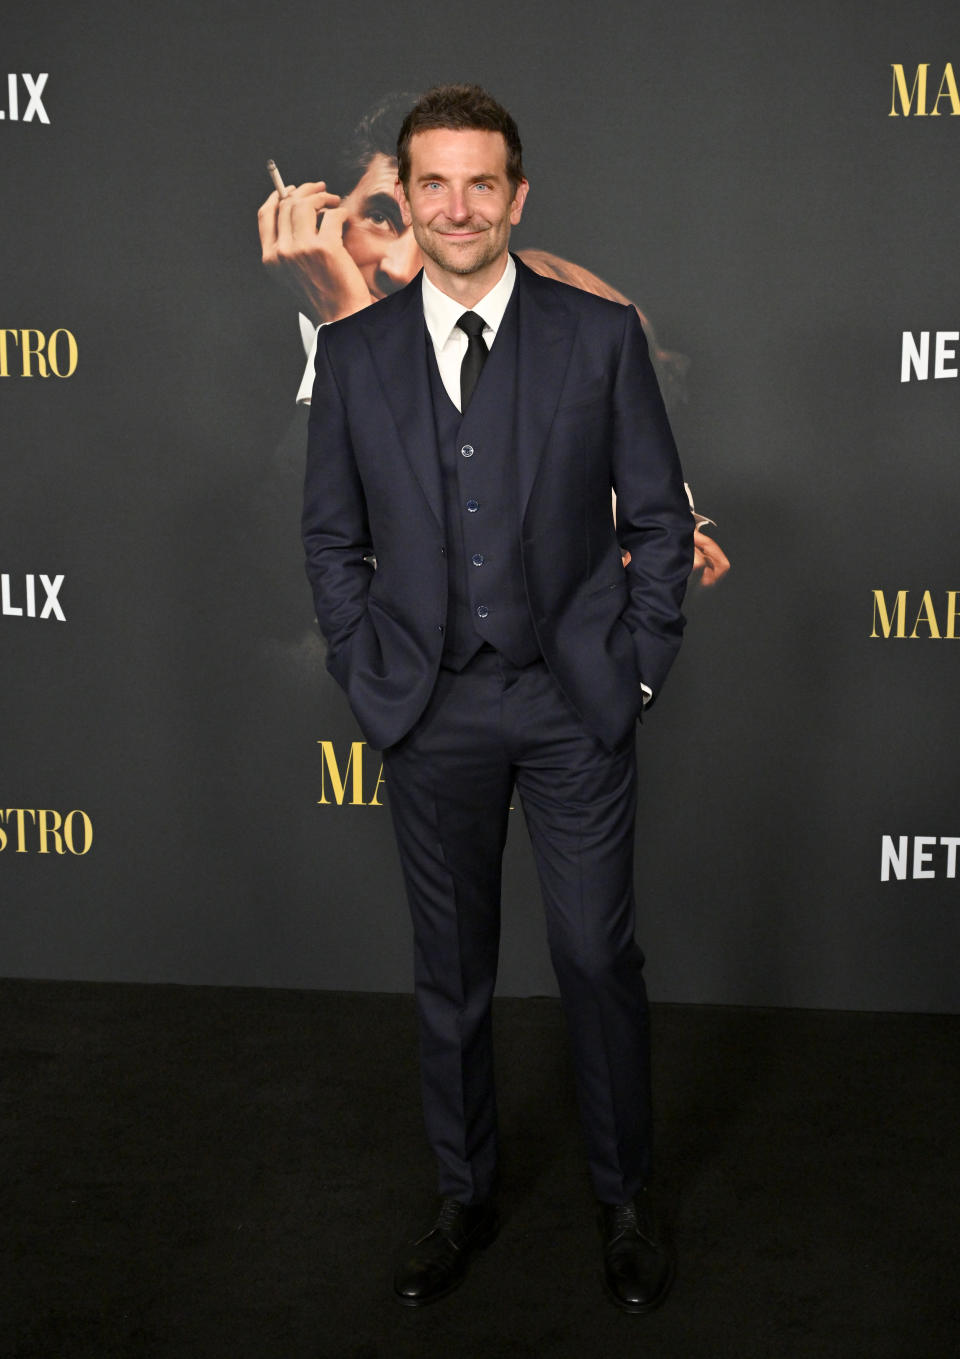 Bradley Cooper stands smiling in a tailored navy suit with a tie, at a Netflix event for "Maestro"